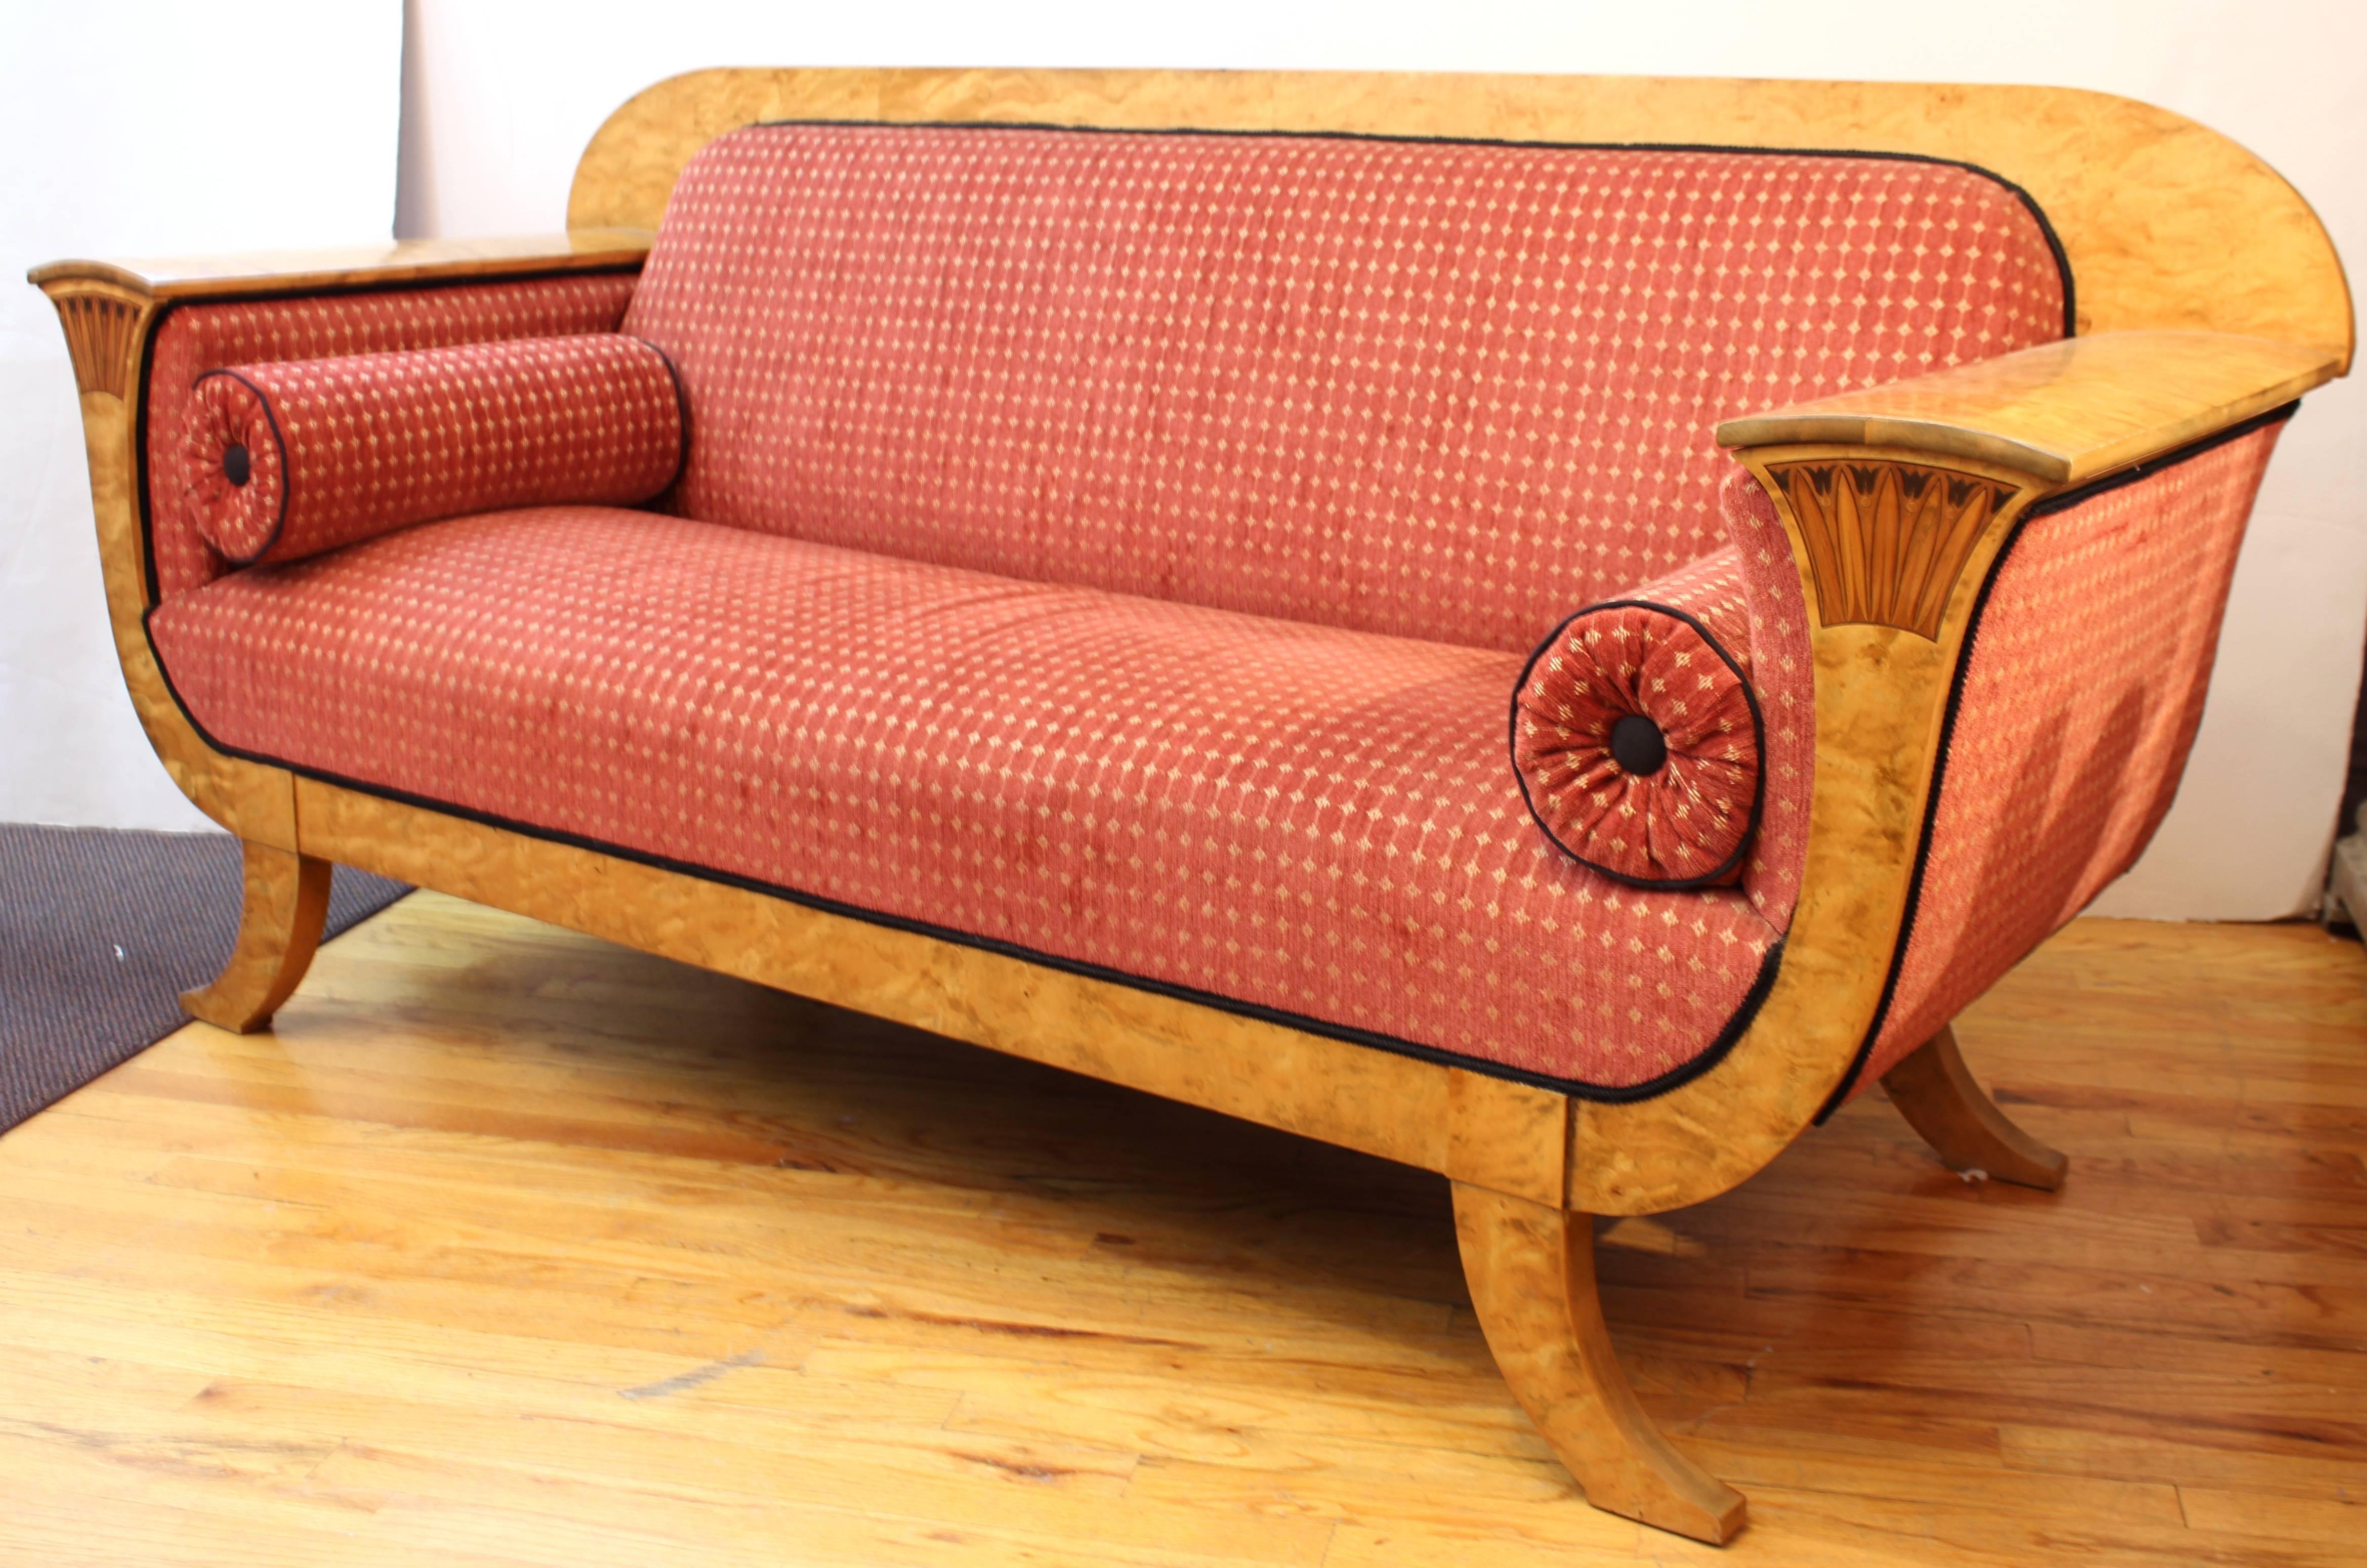 A Biedermeier sofa with a birch frame and luxurious red upholstery and cushions. The piece has low relief neoclassical accents near the armrests on the front. In good vintage condition having wear consistent with age and use.